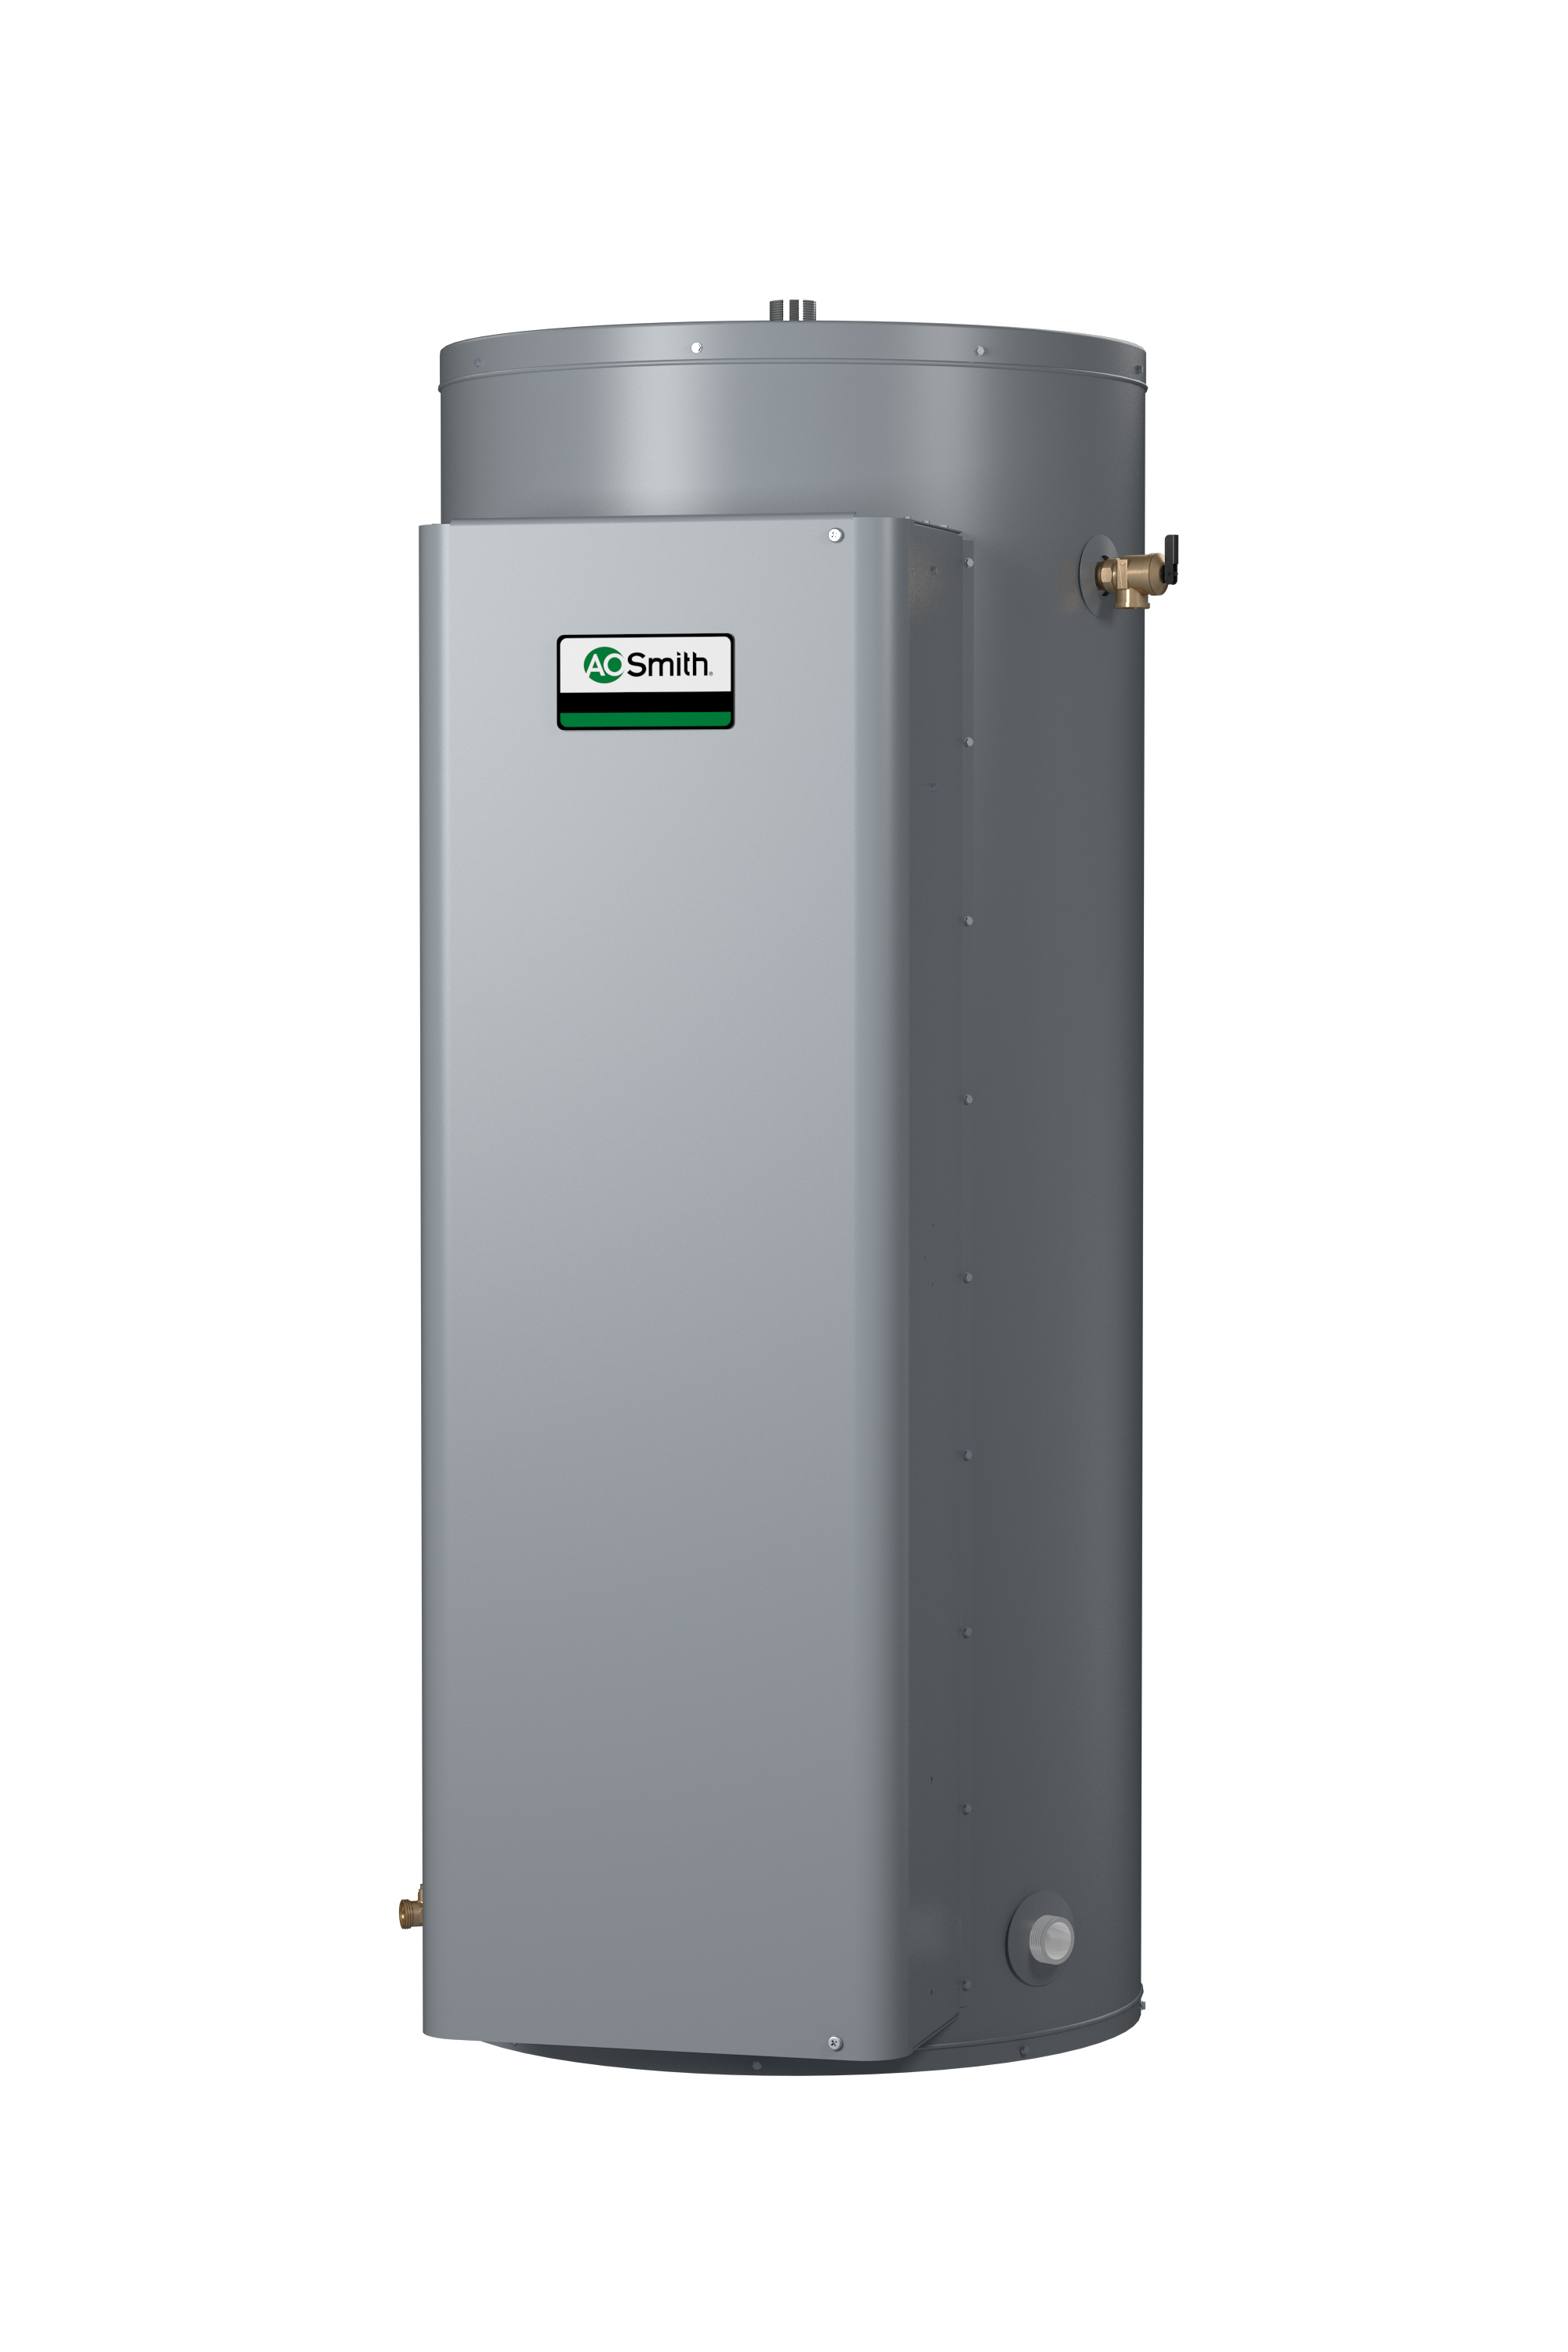 AO SMITH DRE-120-15: 119 GALLON, 15.0KW, 208 VOLT, 72.1 AMPS, 1 PHASE, 3 ELEMENT, COMMERCIAL ELECTRIC WATER HEATER, GOLD SERIES